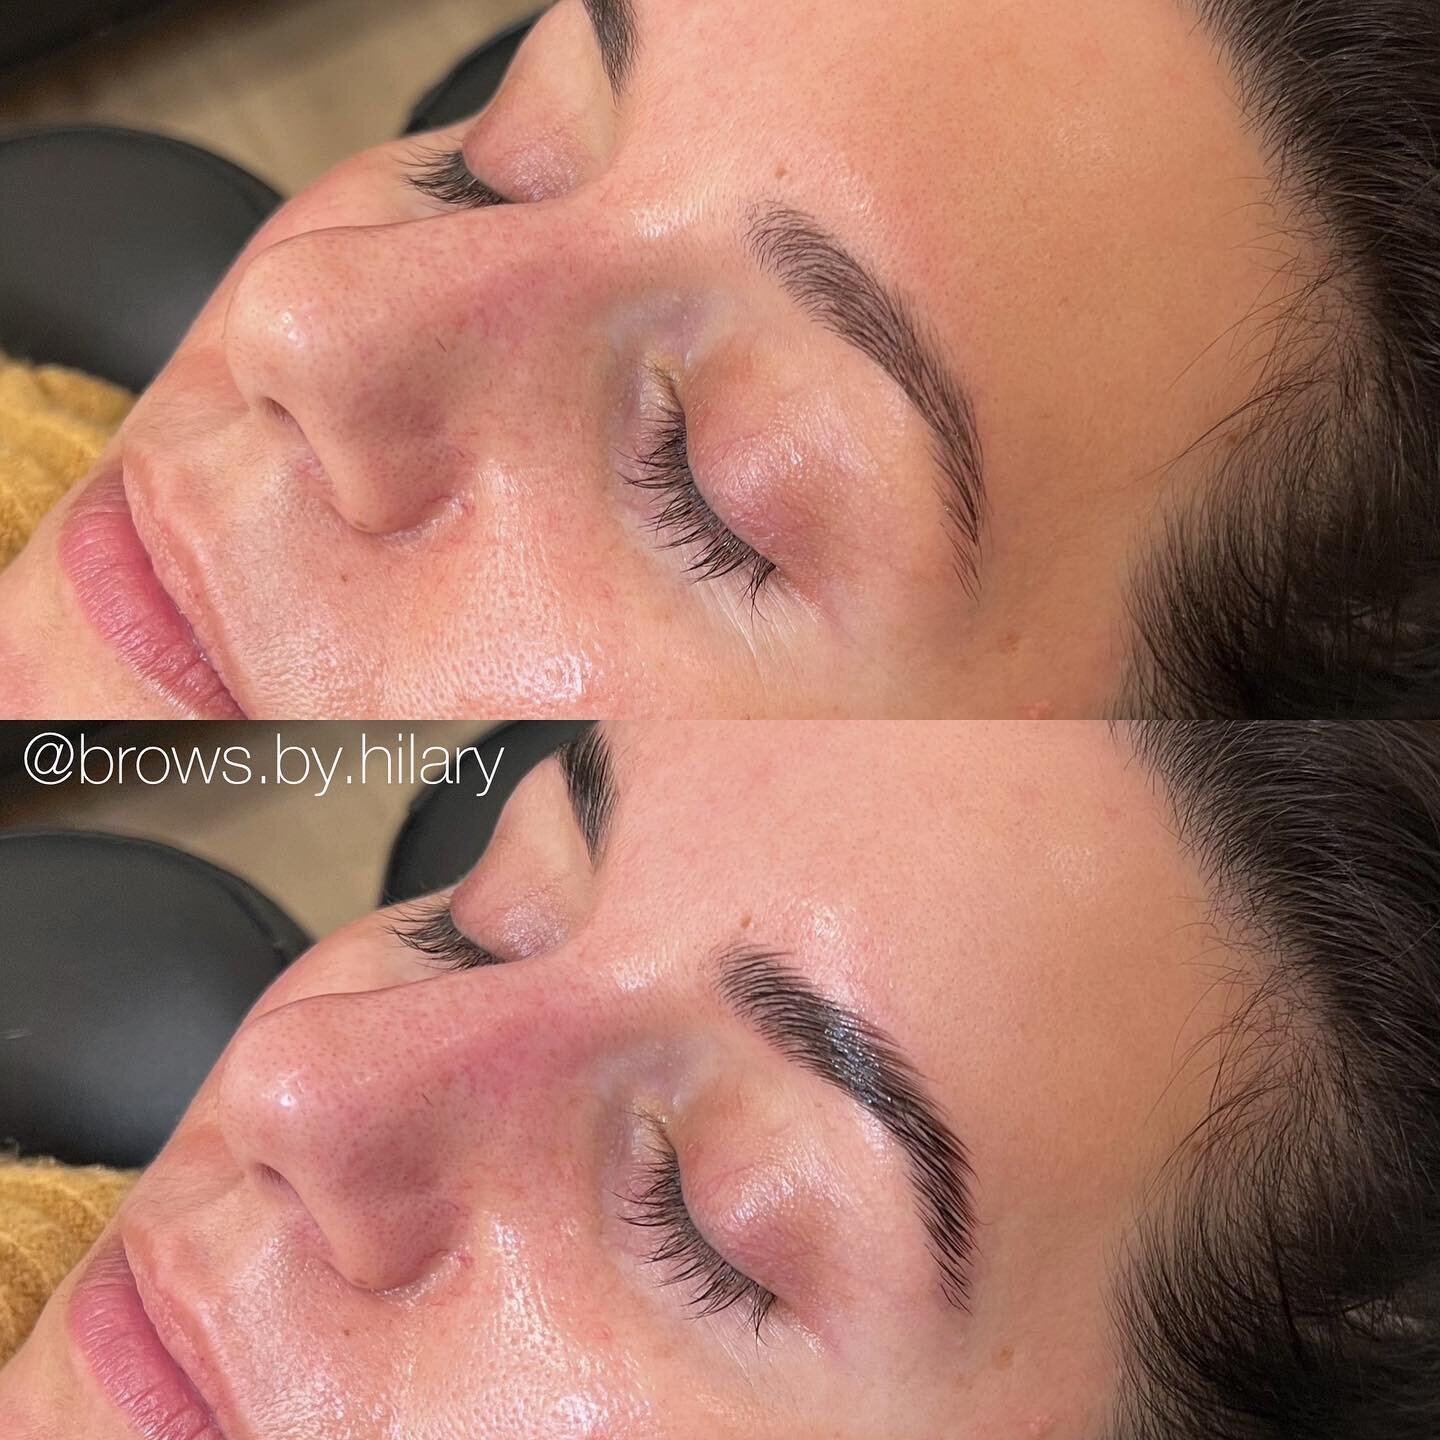 B R O W  L A M I N A T I O N 

Want fluffy, full brows? A brow lamination might be what you need. This treatment creates the illusion of fuller brows.

Who&rsquo;s a candidate? Anyone with eyebrows!

#eyebrows #brows #browlamination #fluffybrows #ful